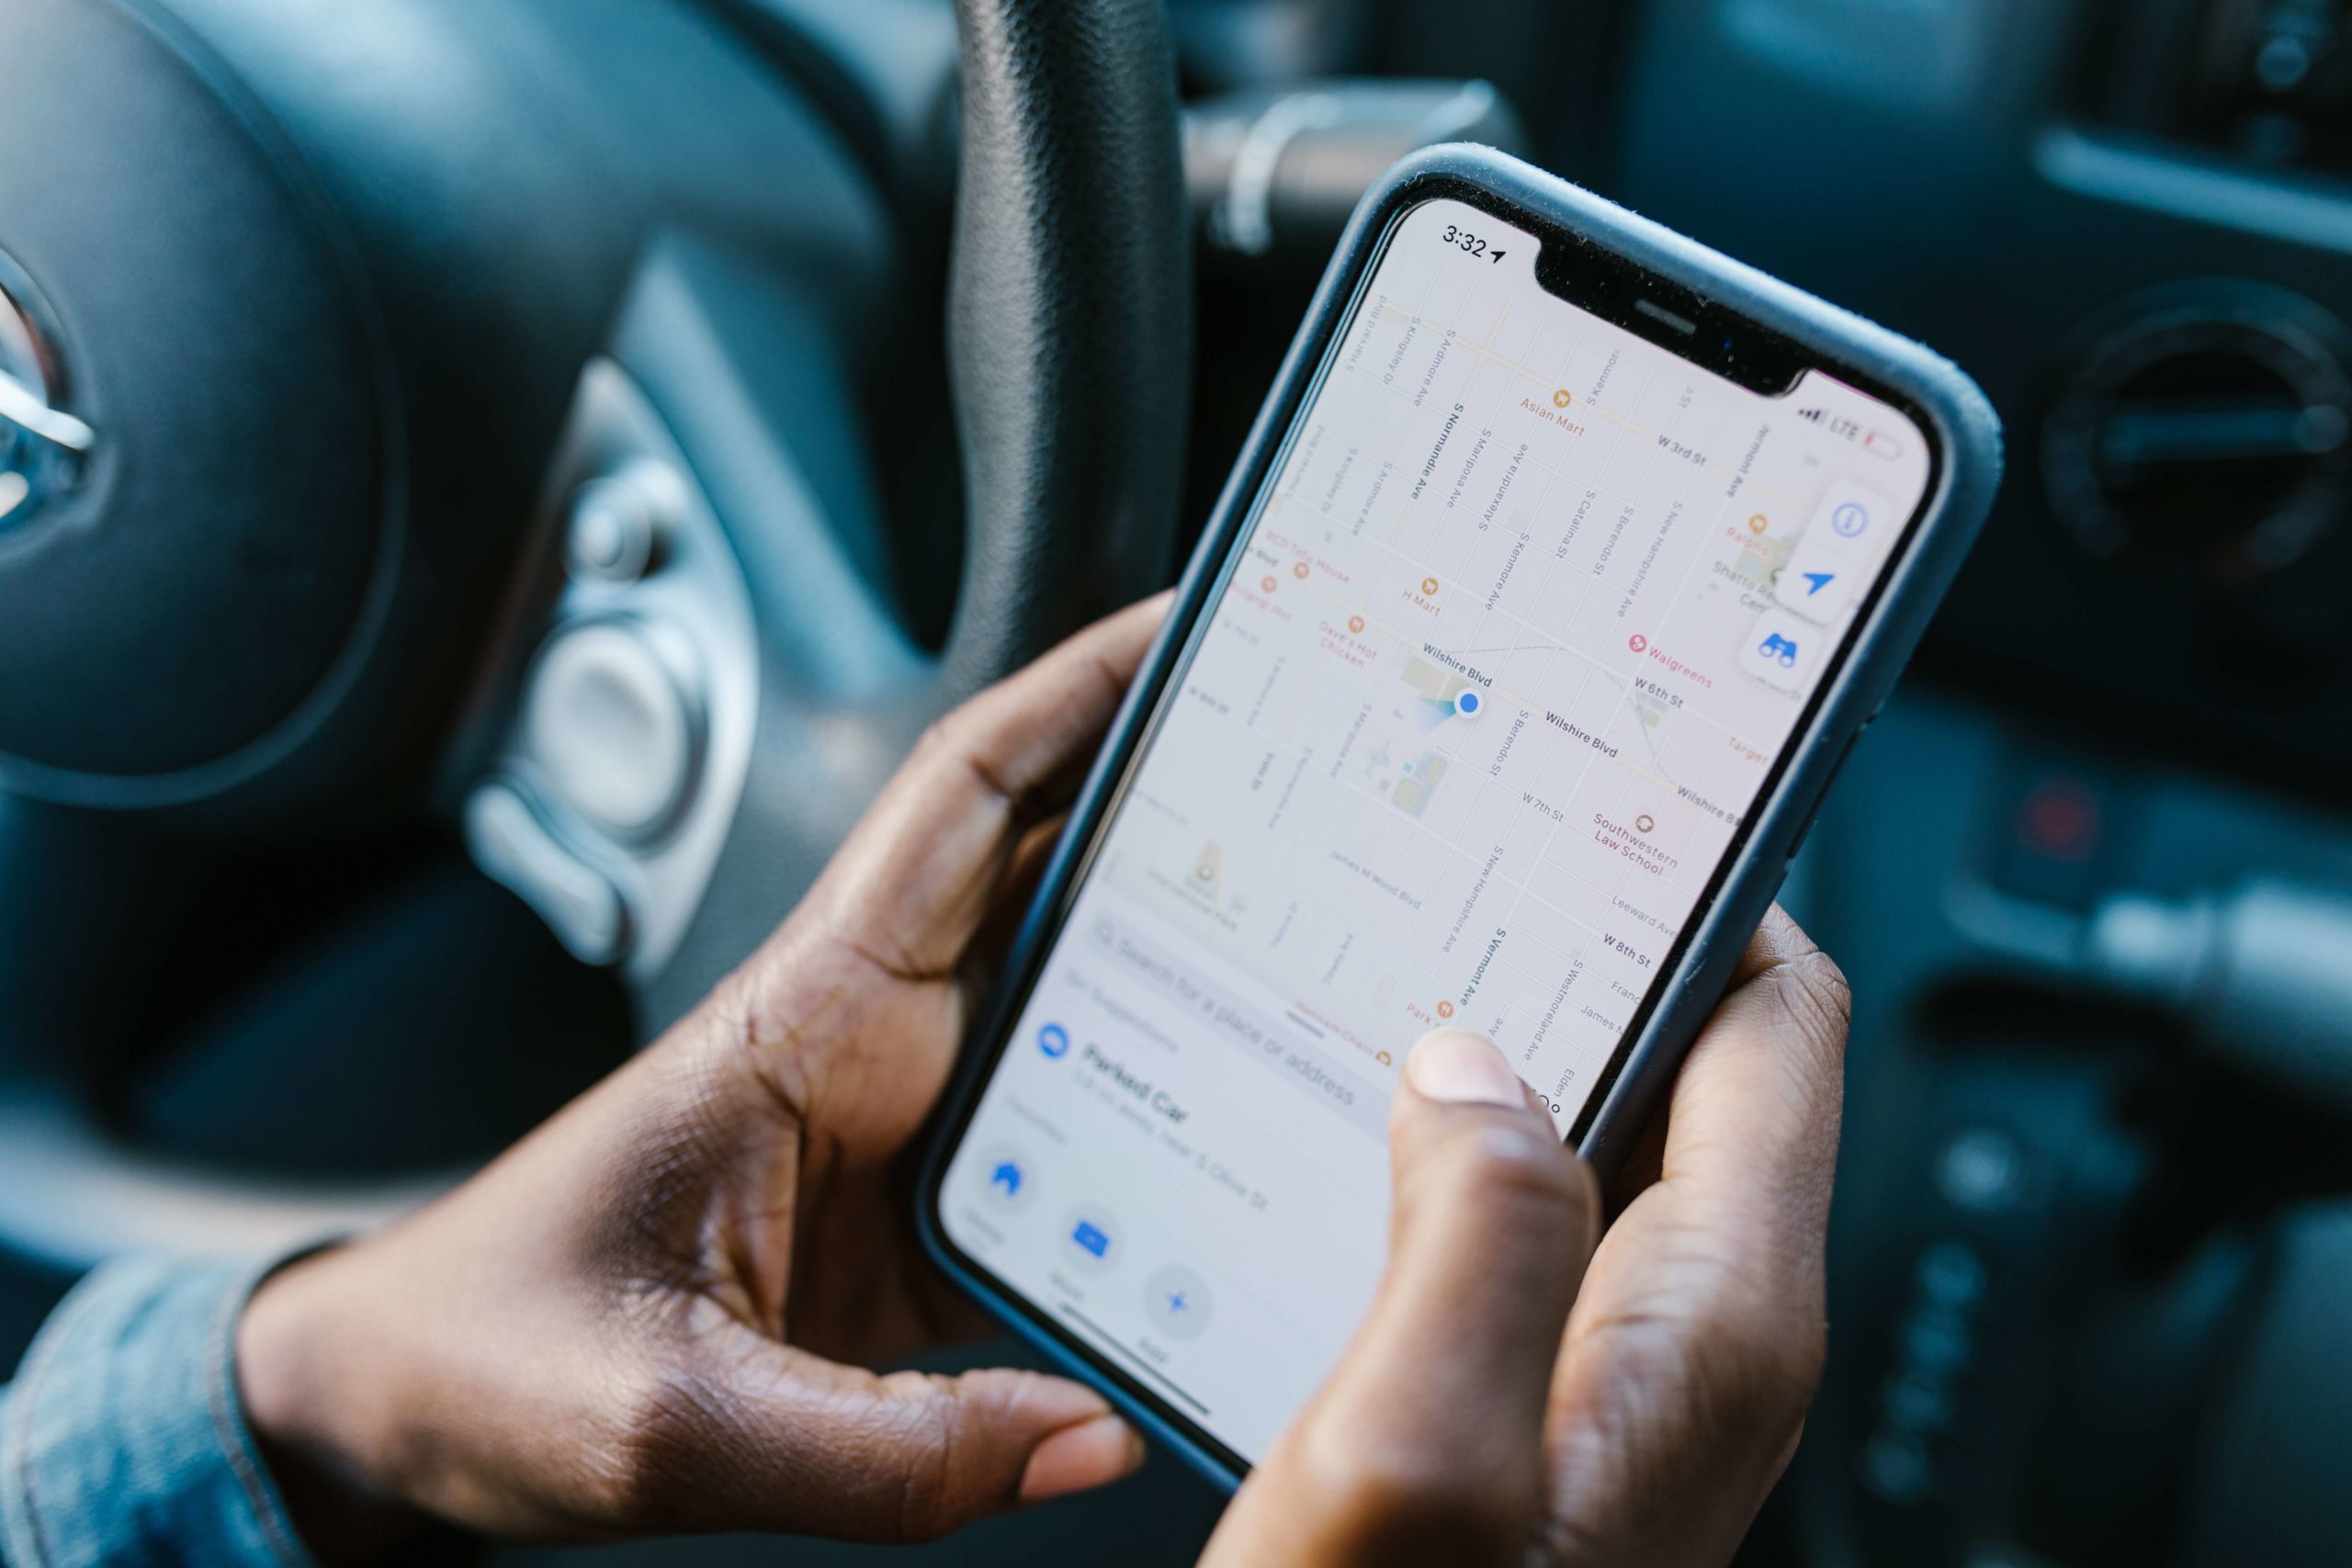 iPhone maps GIS used to find directions for driving